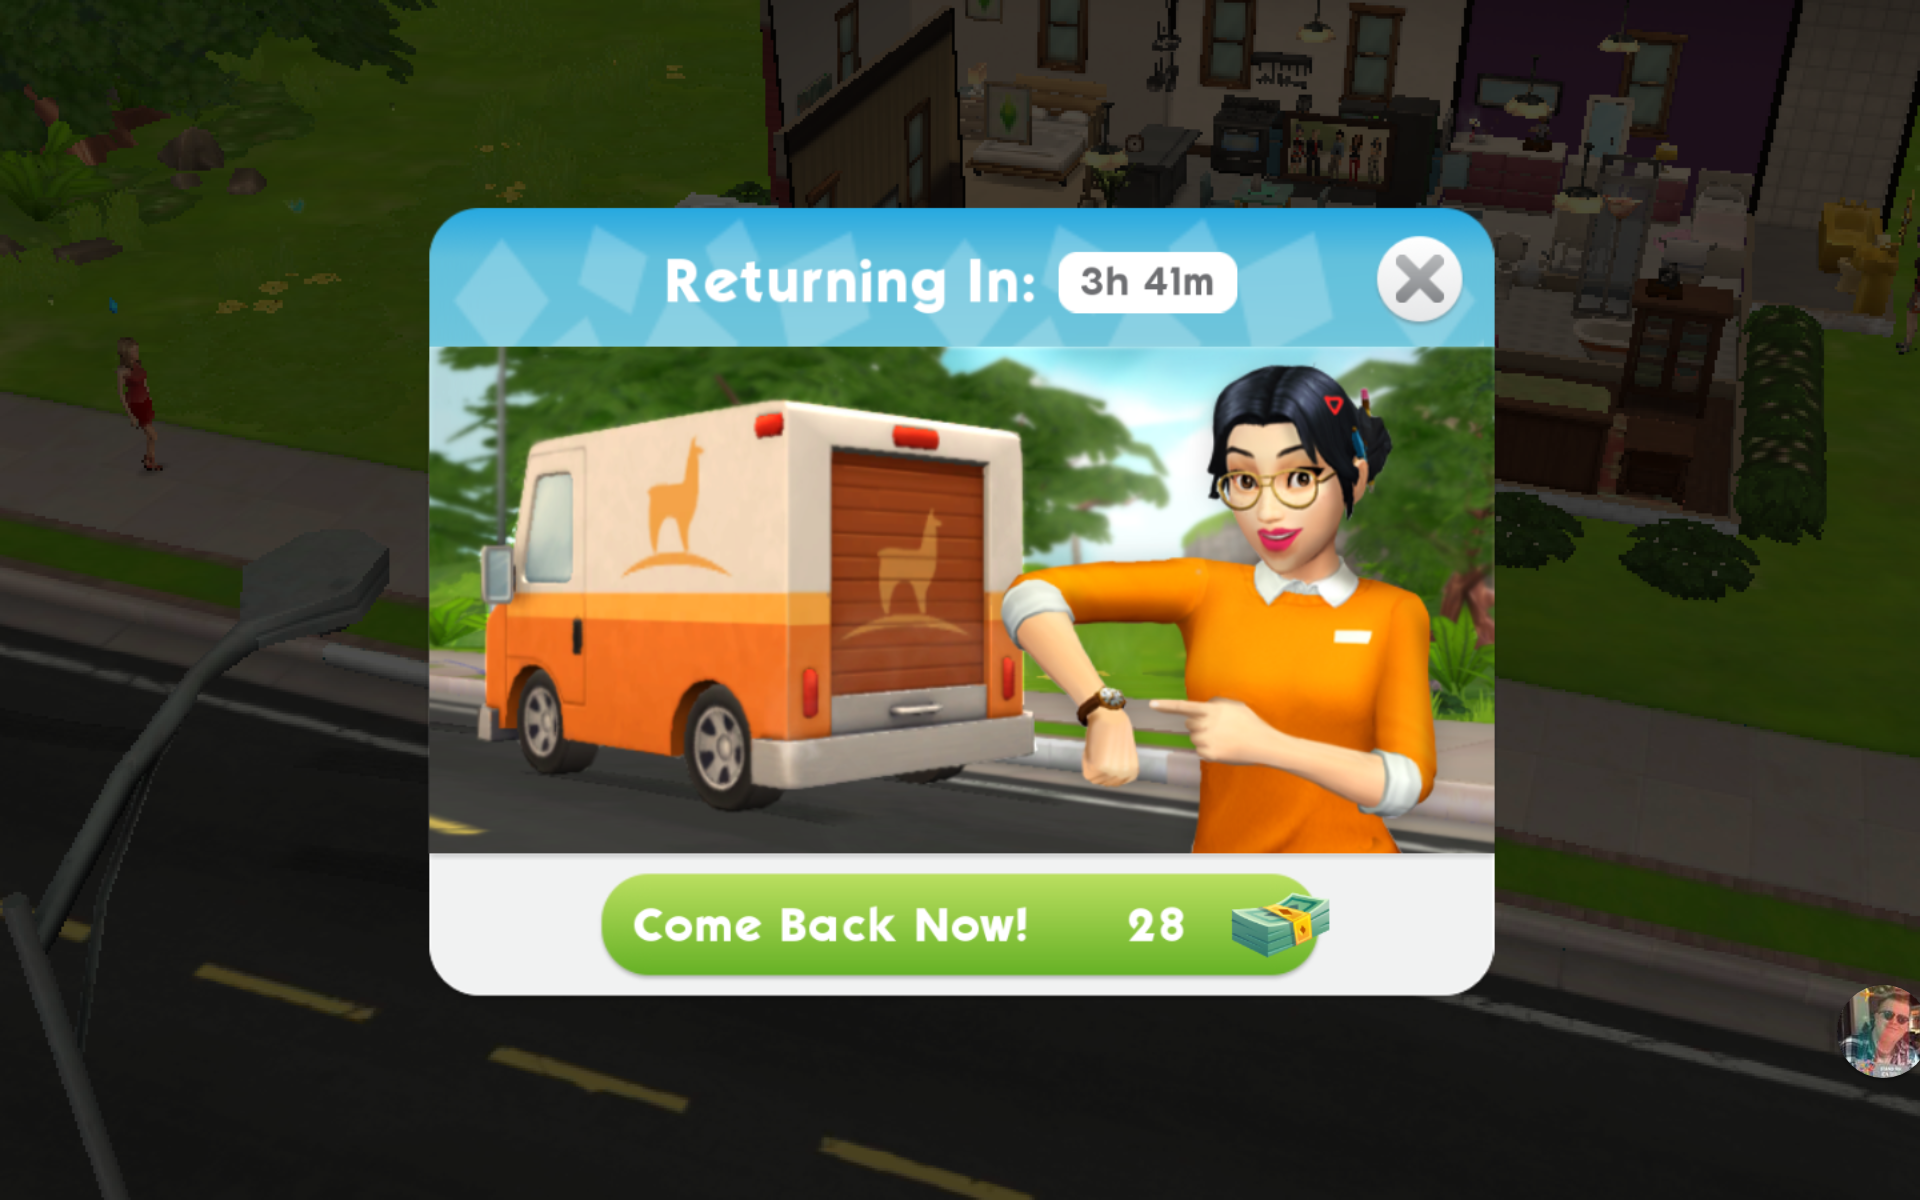 finished the barista story in the sims mobile game